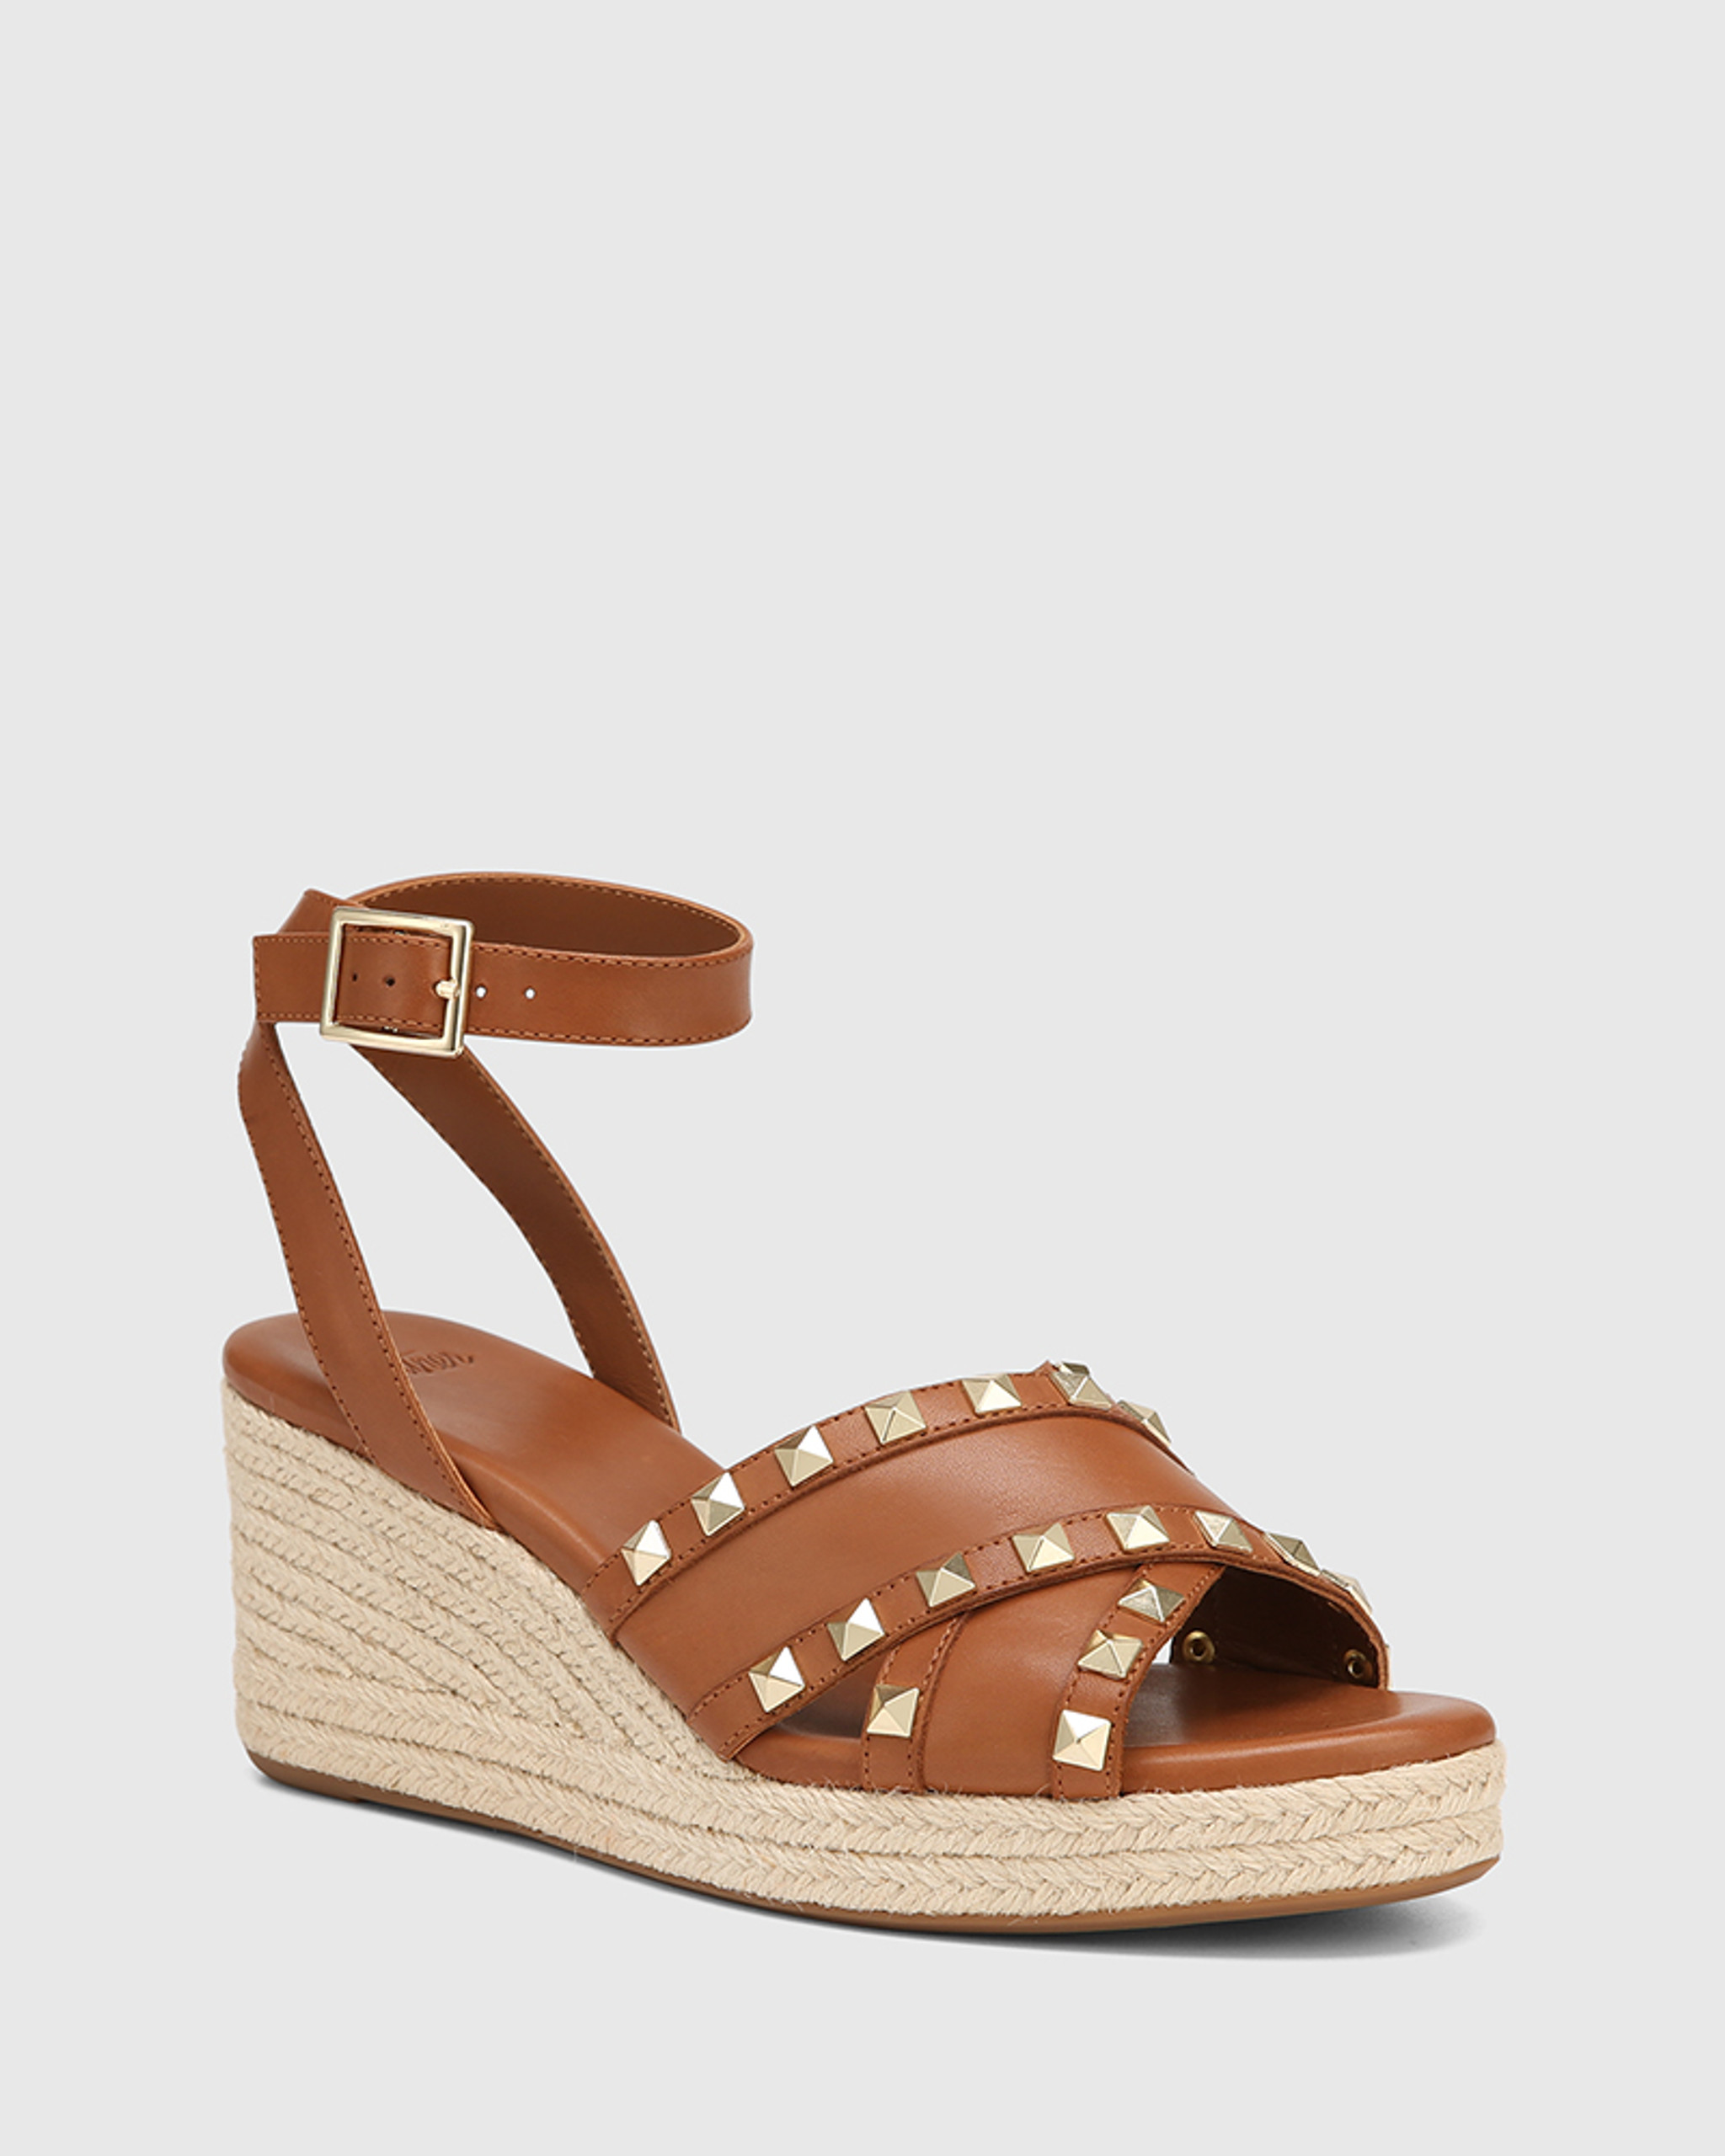 Plakton Rome Wedge Sandals in Dark Brown Leather | rubyshoesday